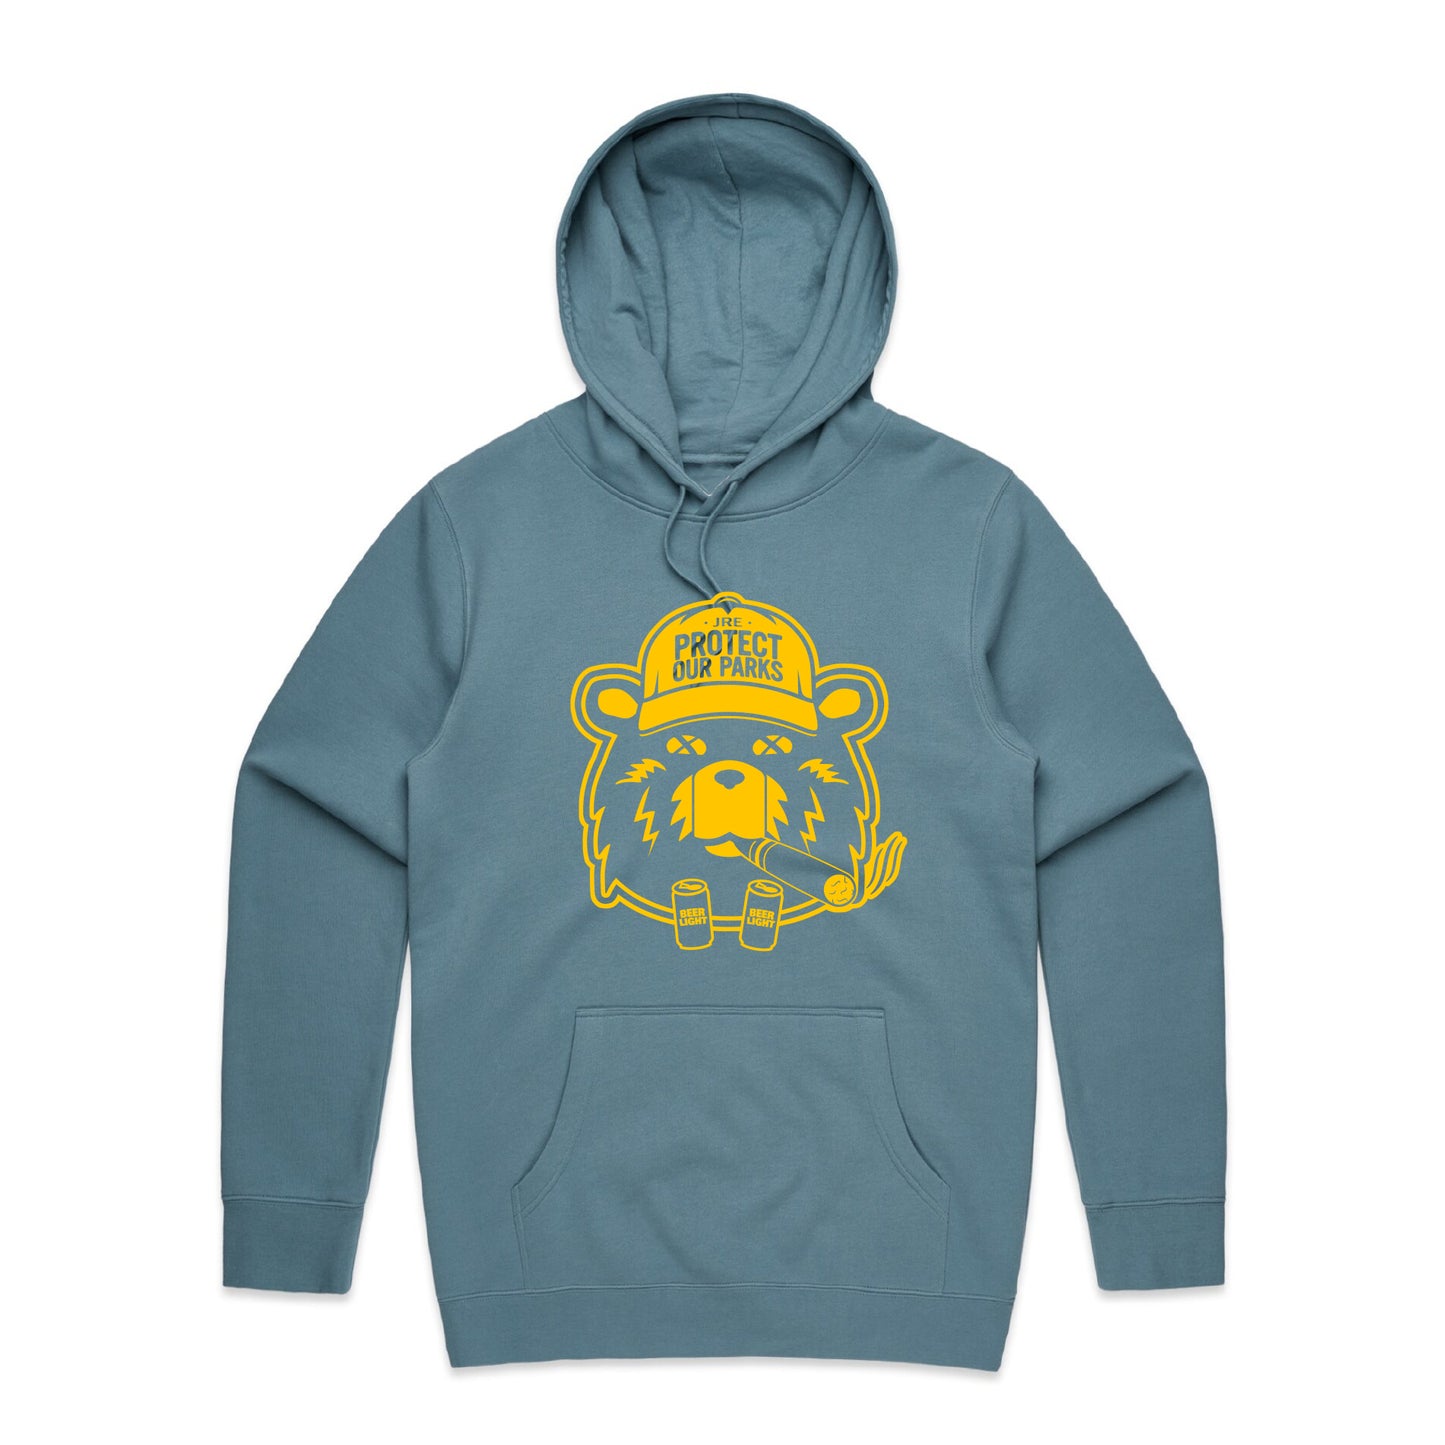 Protect Our Parks Hoodie